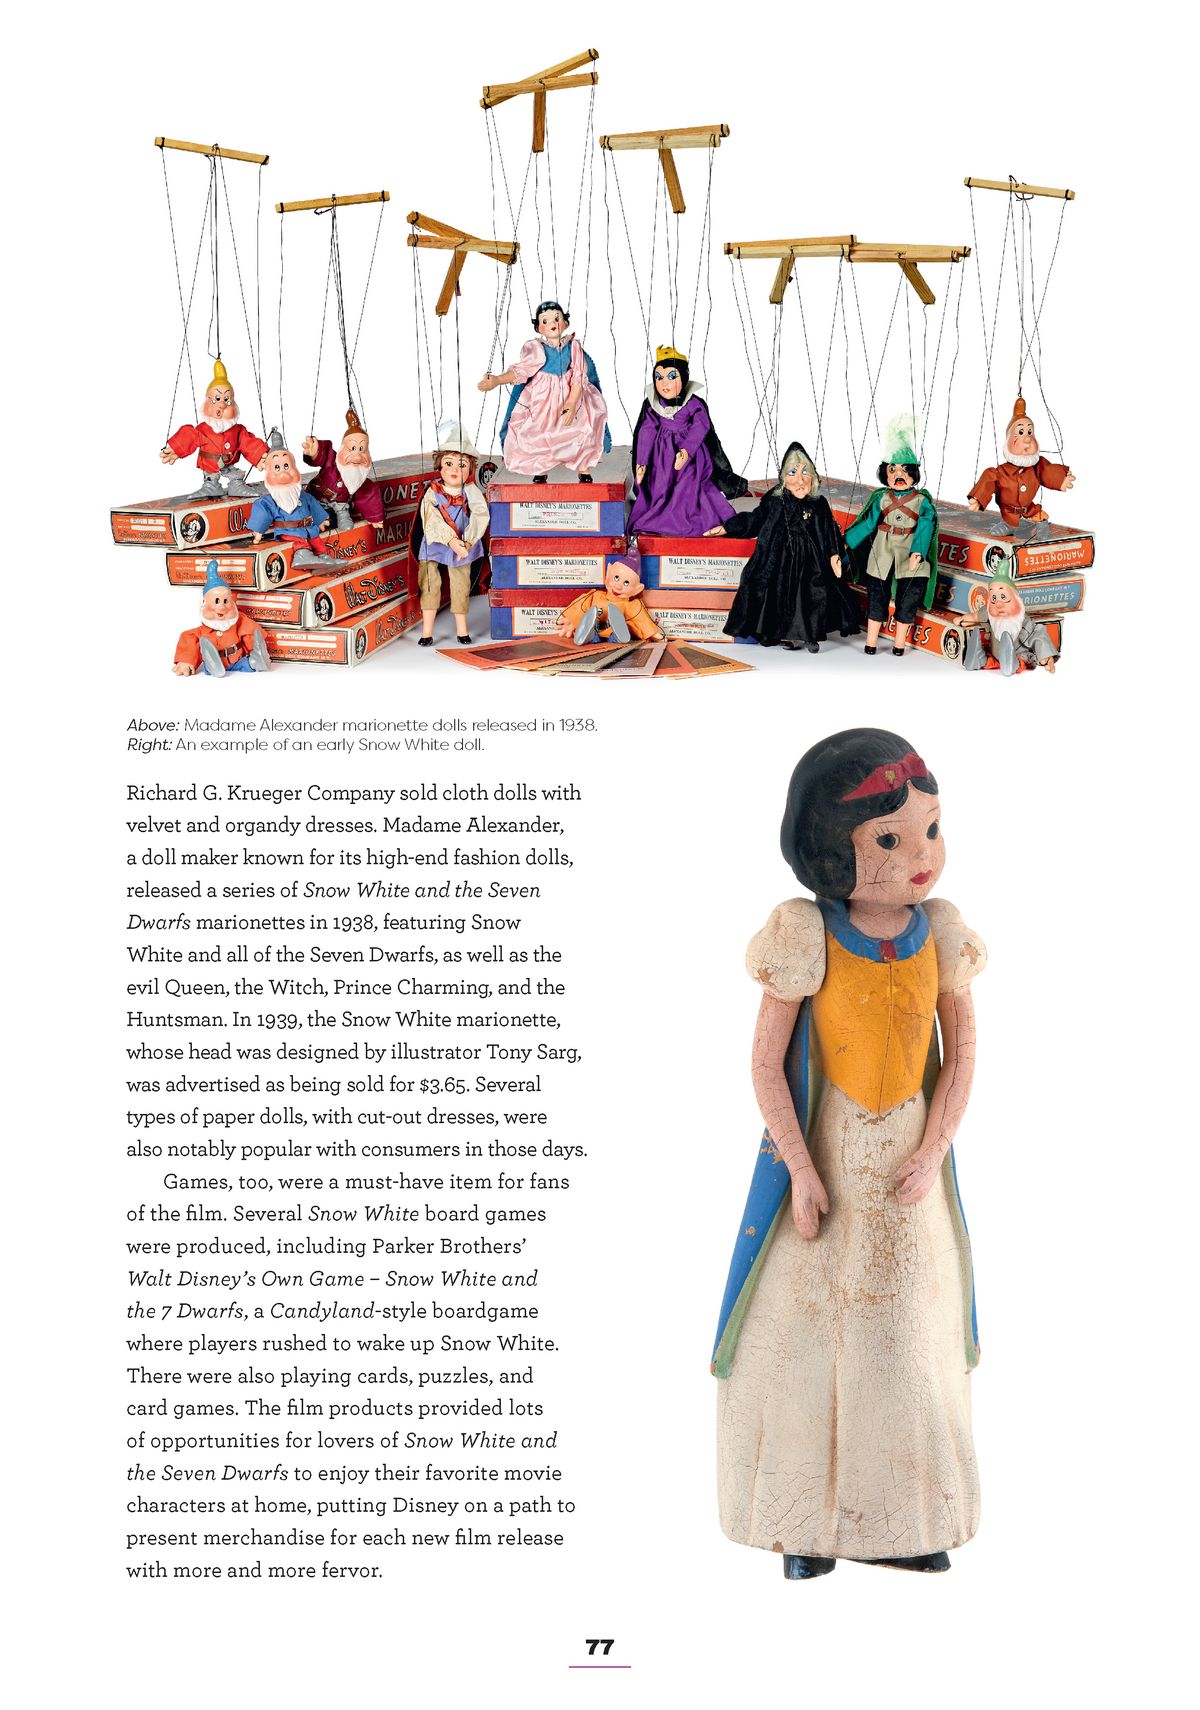 a page from Disney Princess: Beyond the Tiara.  most of it is text, but at the top is an image of marionette puppets, themed Snow White, the Dwarves, the Evil Queen, the Prince, and the Hunstman.  on the left is a porcelain snow white doll 